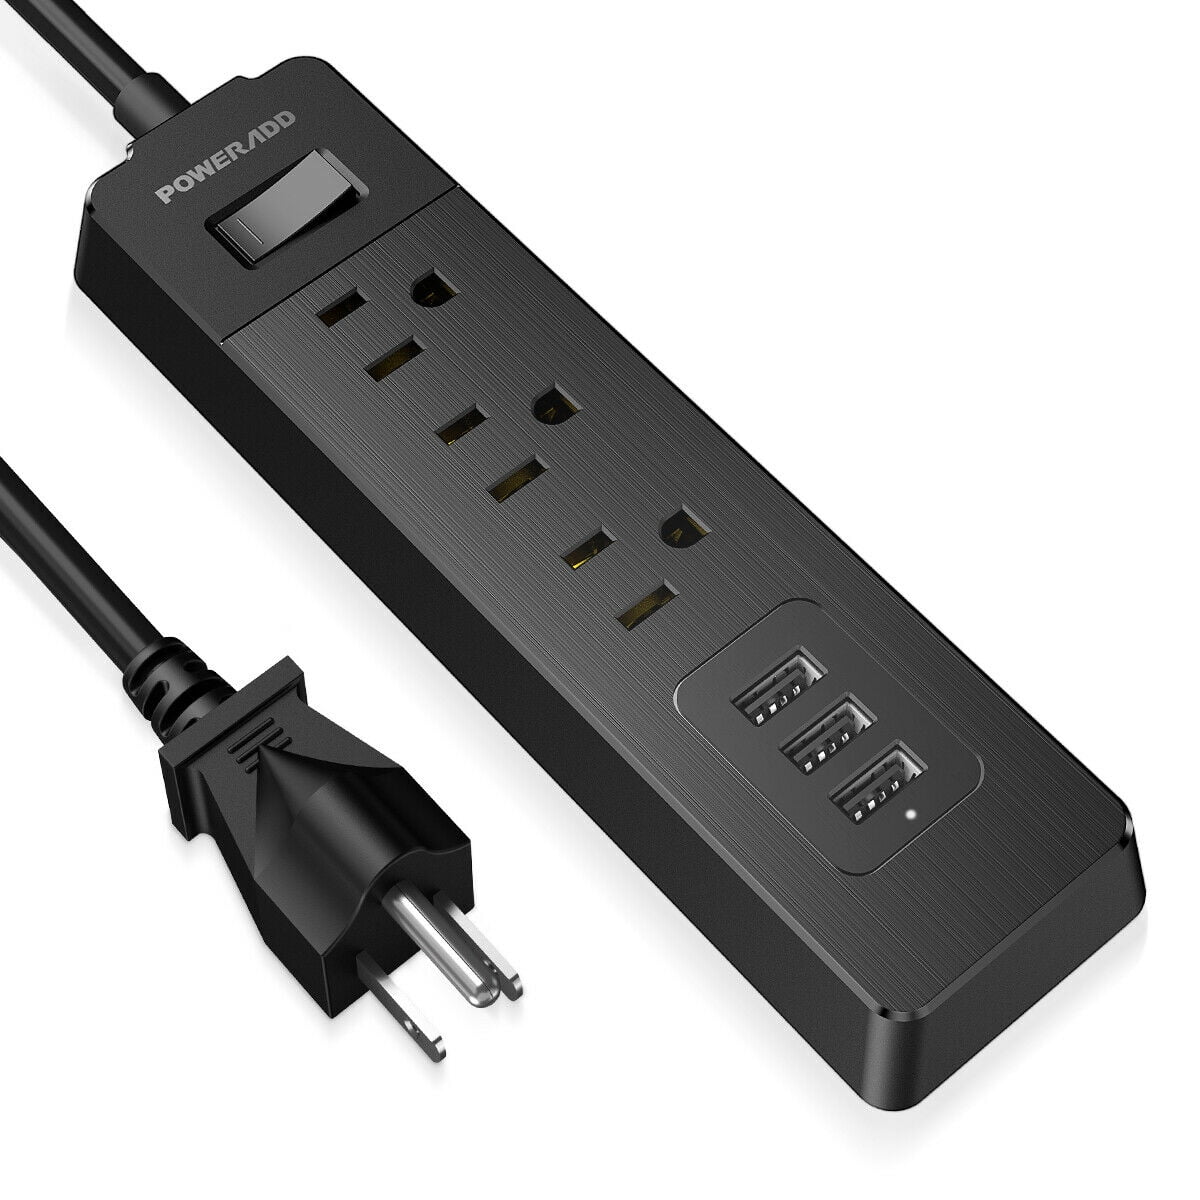 6-Port Outlet Power Strip 3 USB Charging Ports Surge Protector Lightningproof US 